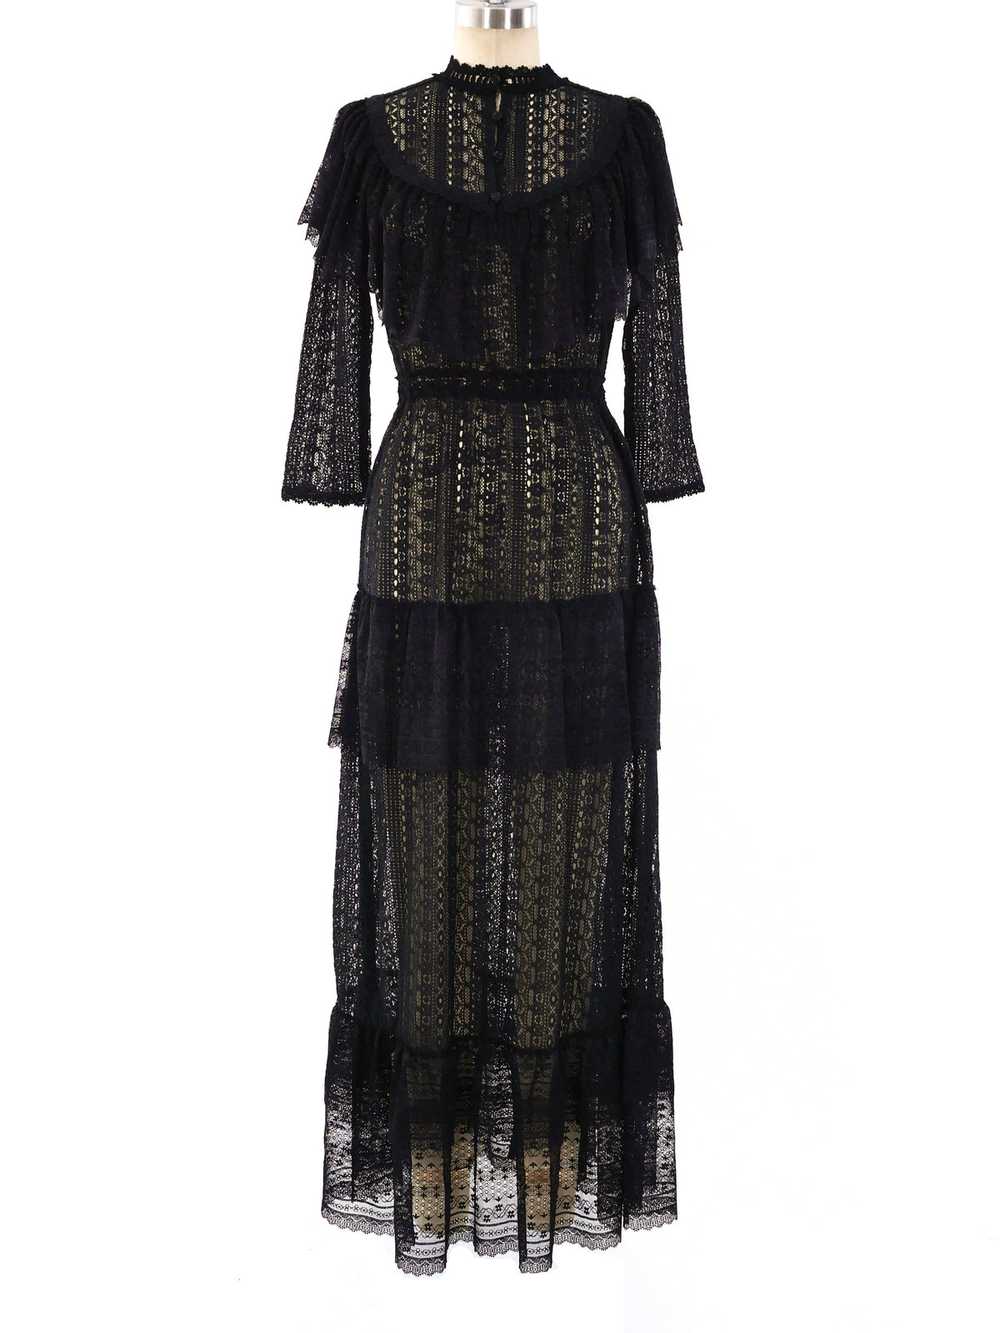 Black Tiered Lace Maxi Dress - image 1